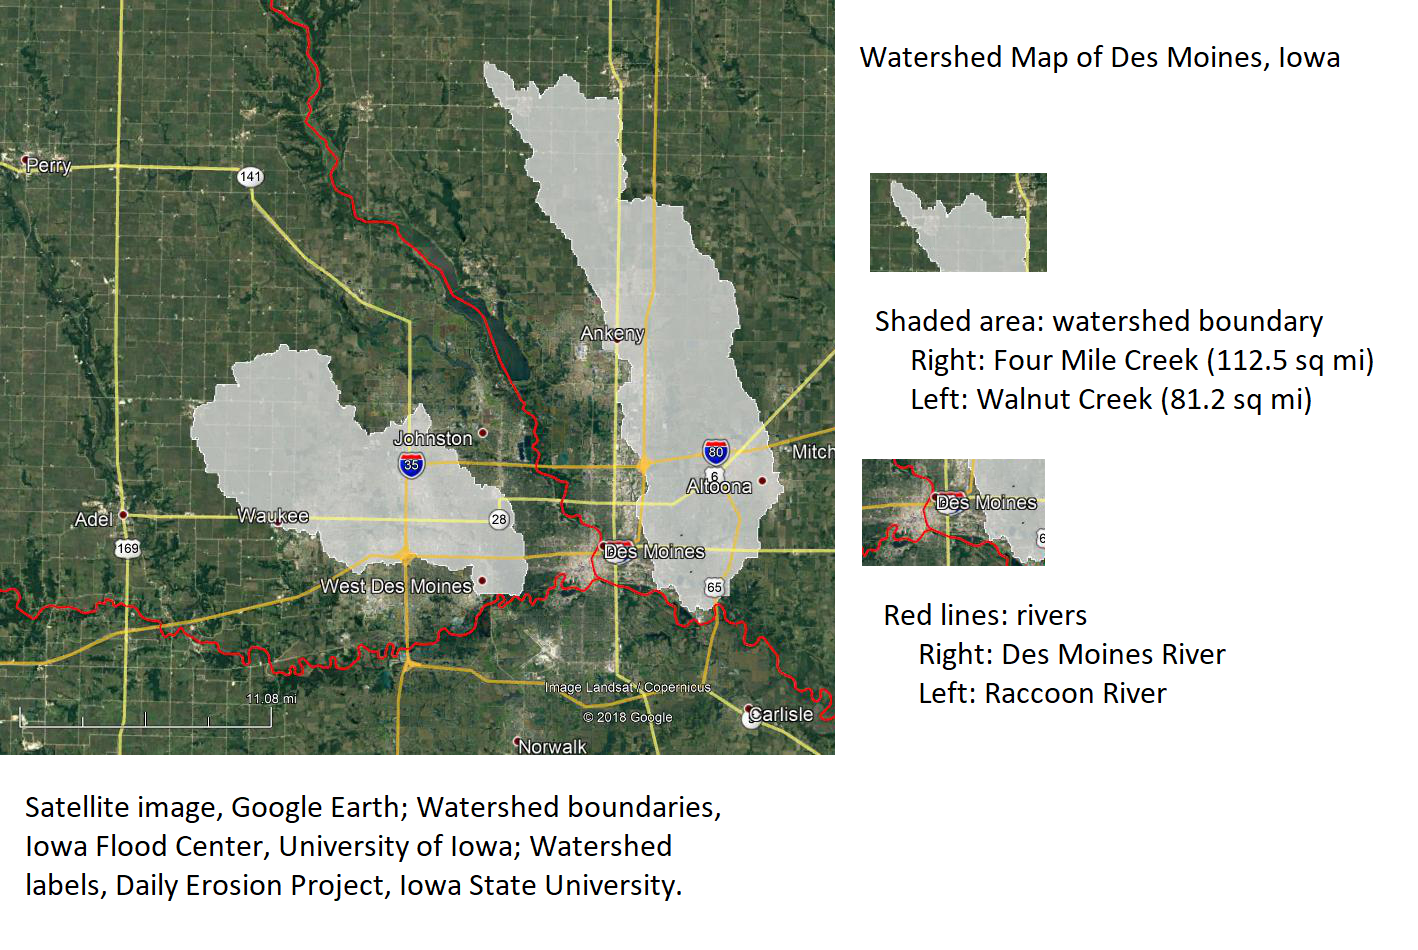 des moines watershed map showing four mile and walnut creek watersheds